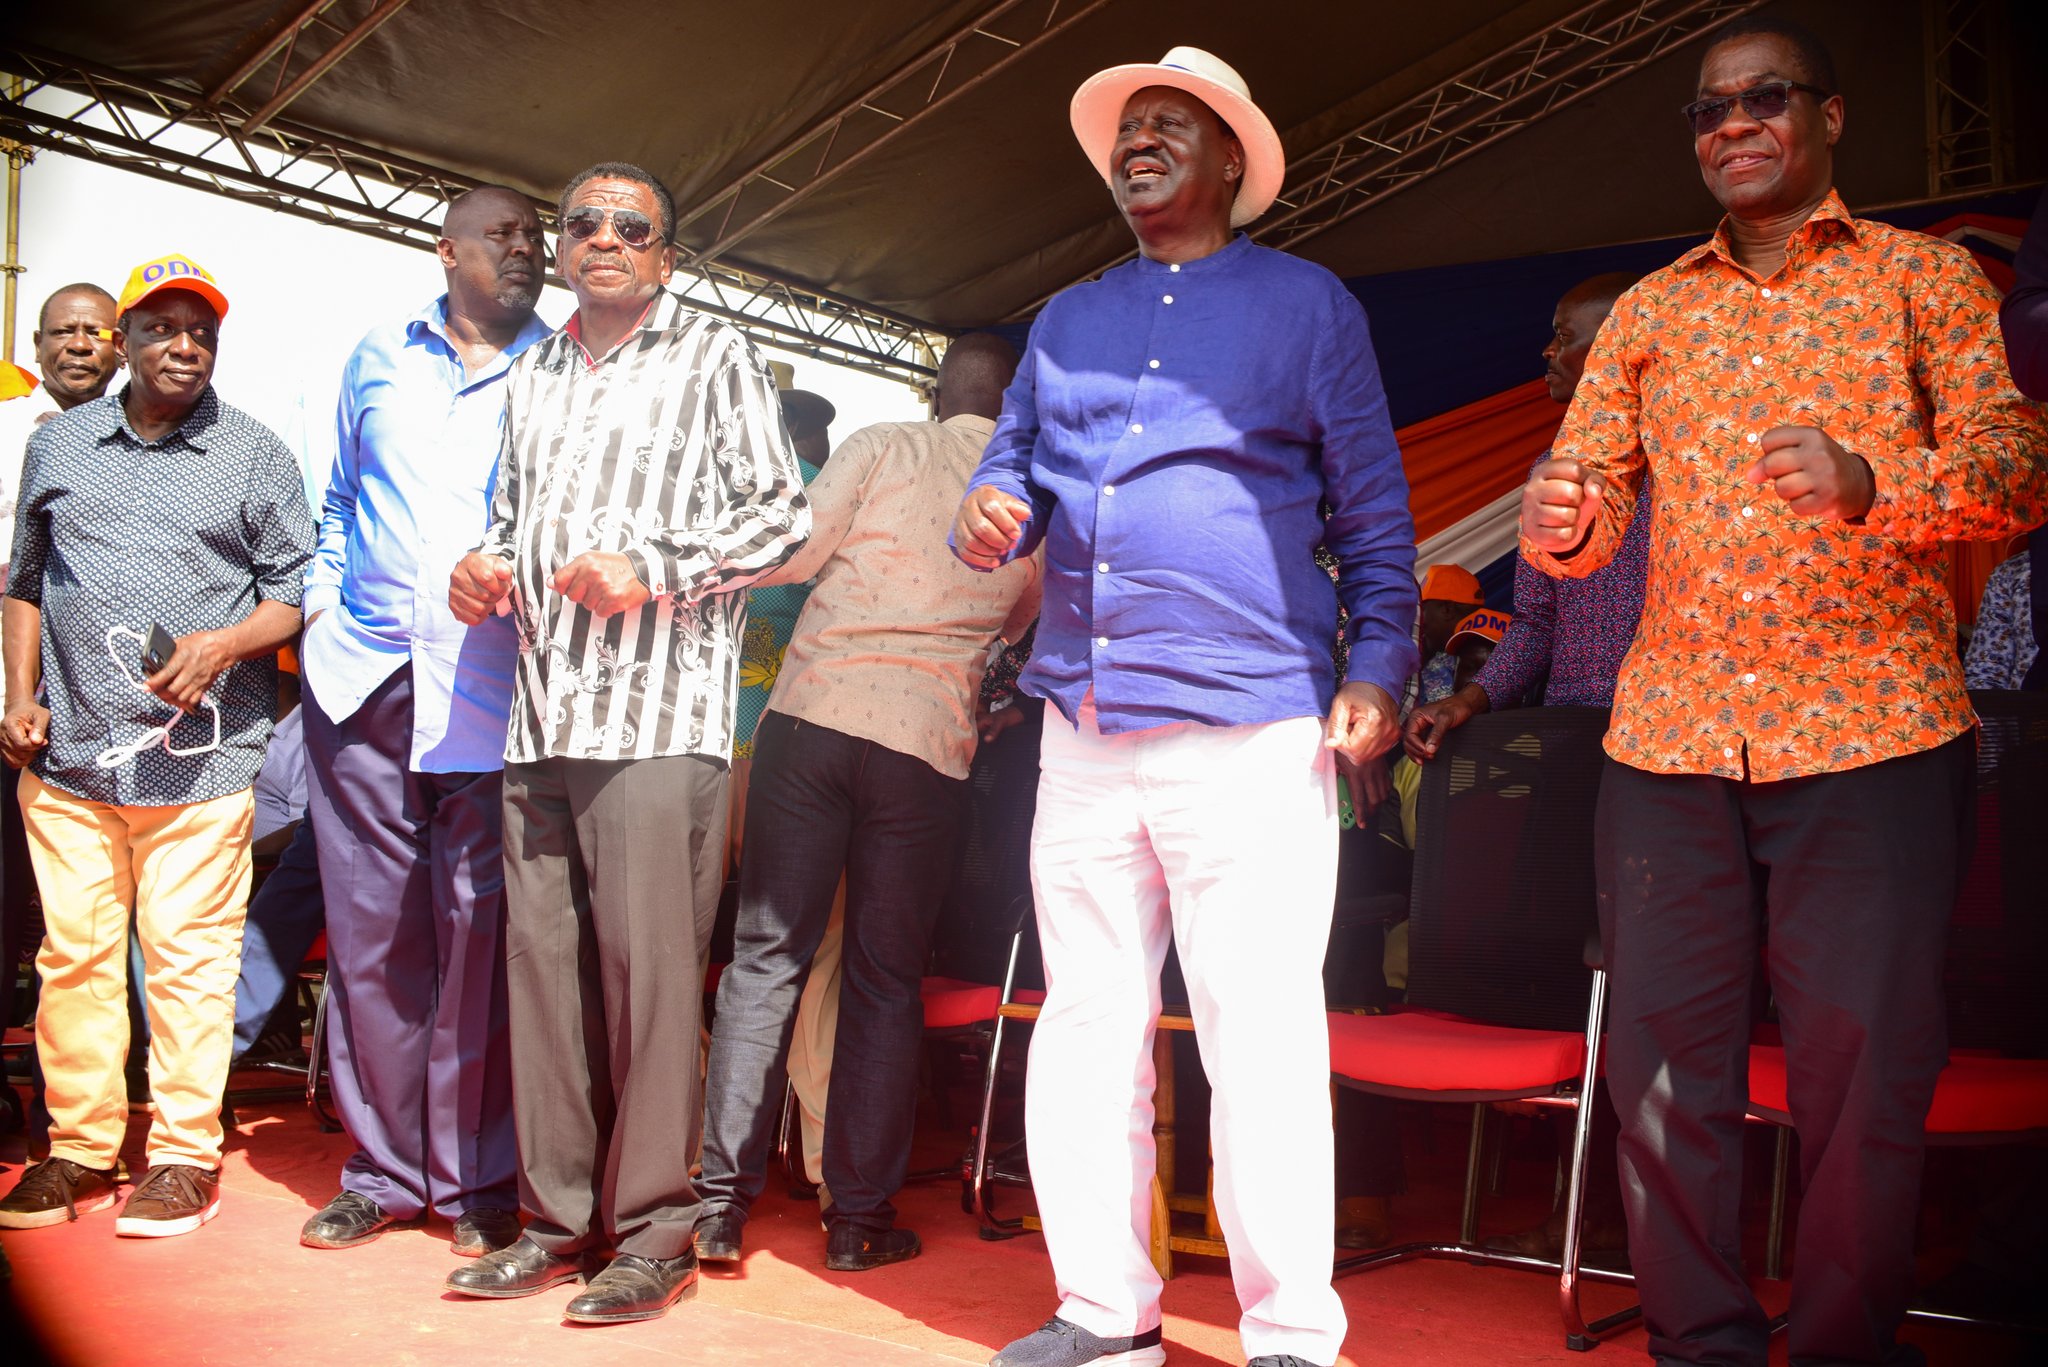 James Orengo has demanded that all Azimio leaders security be reinstated as he threatens that Azimio Governors will boycott Council of Governors meeting.